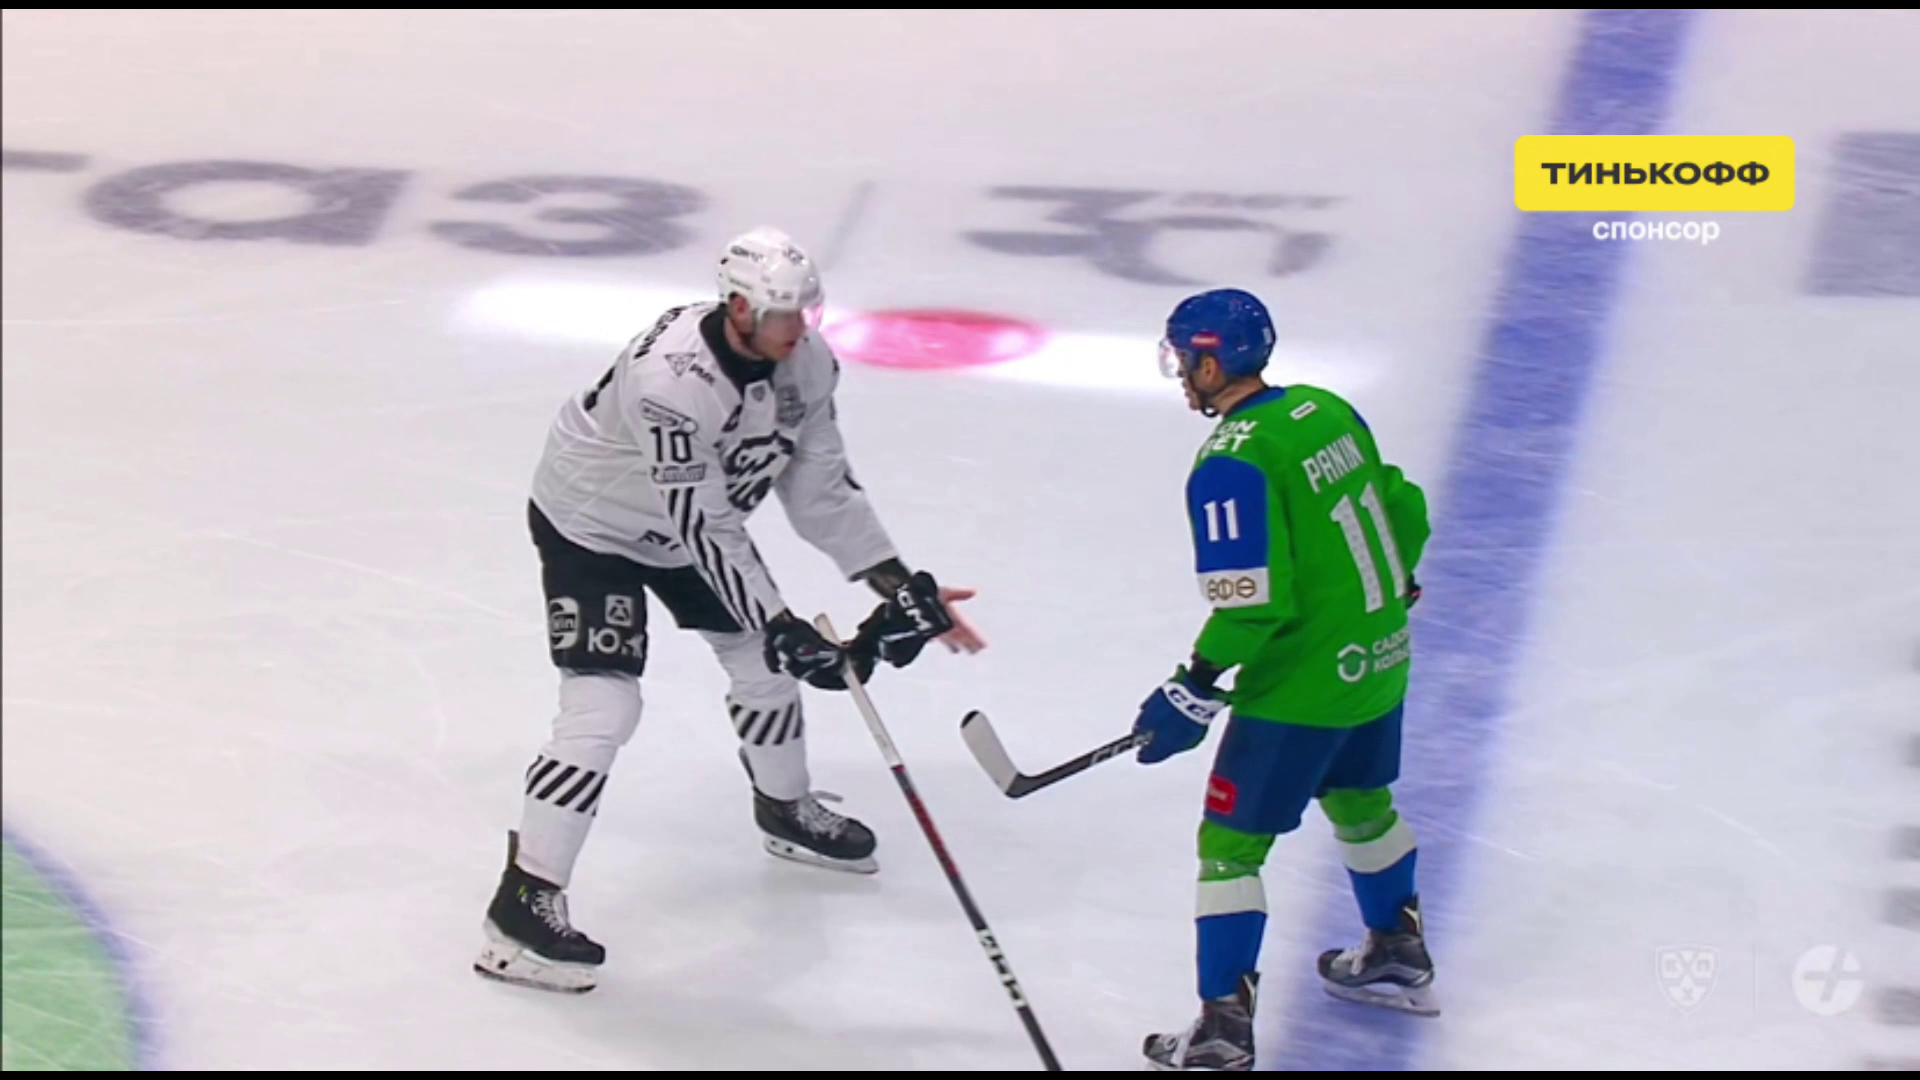 An American hockey player brutally knocked out the Russian champion with his first punch